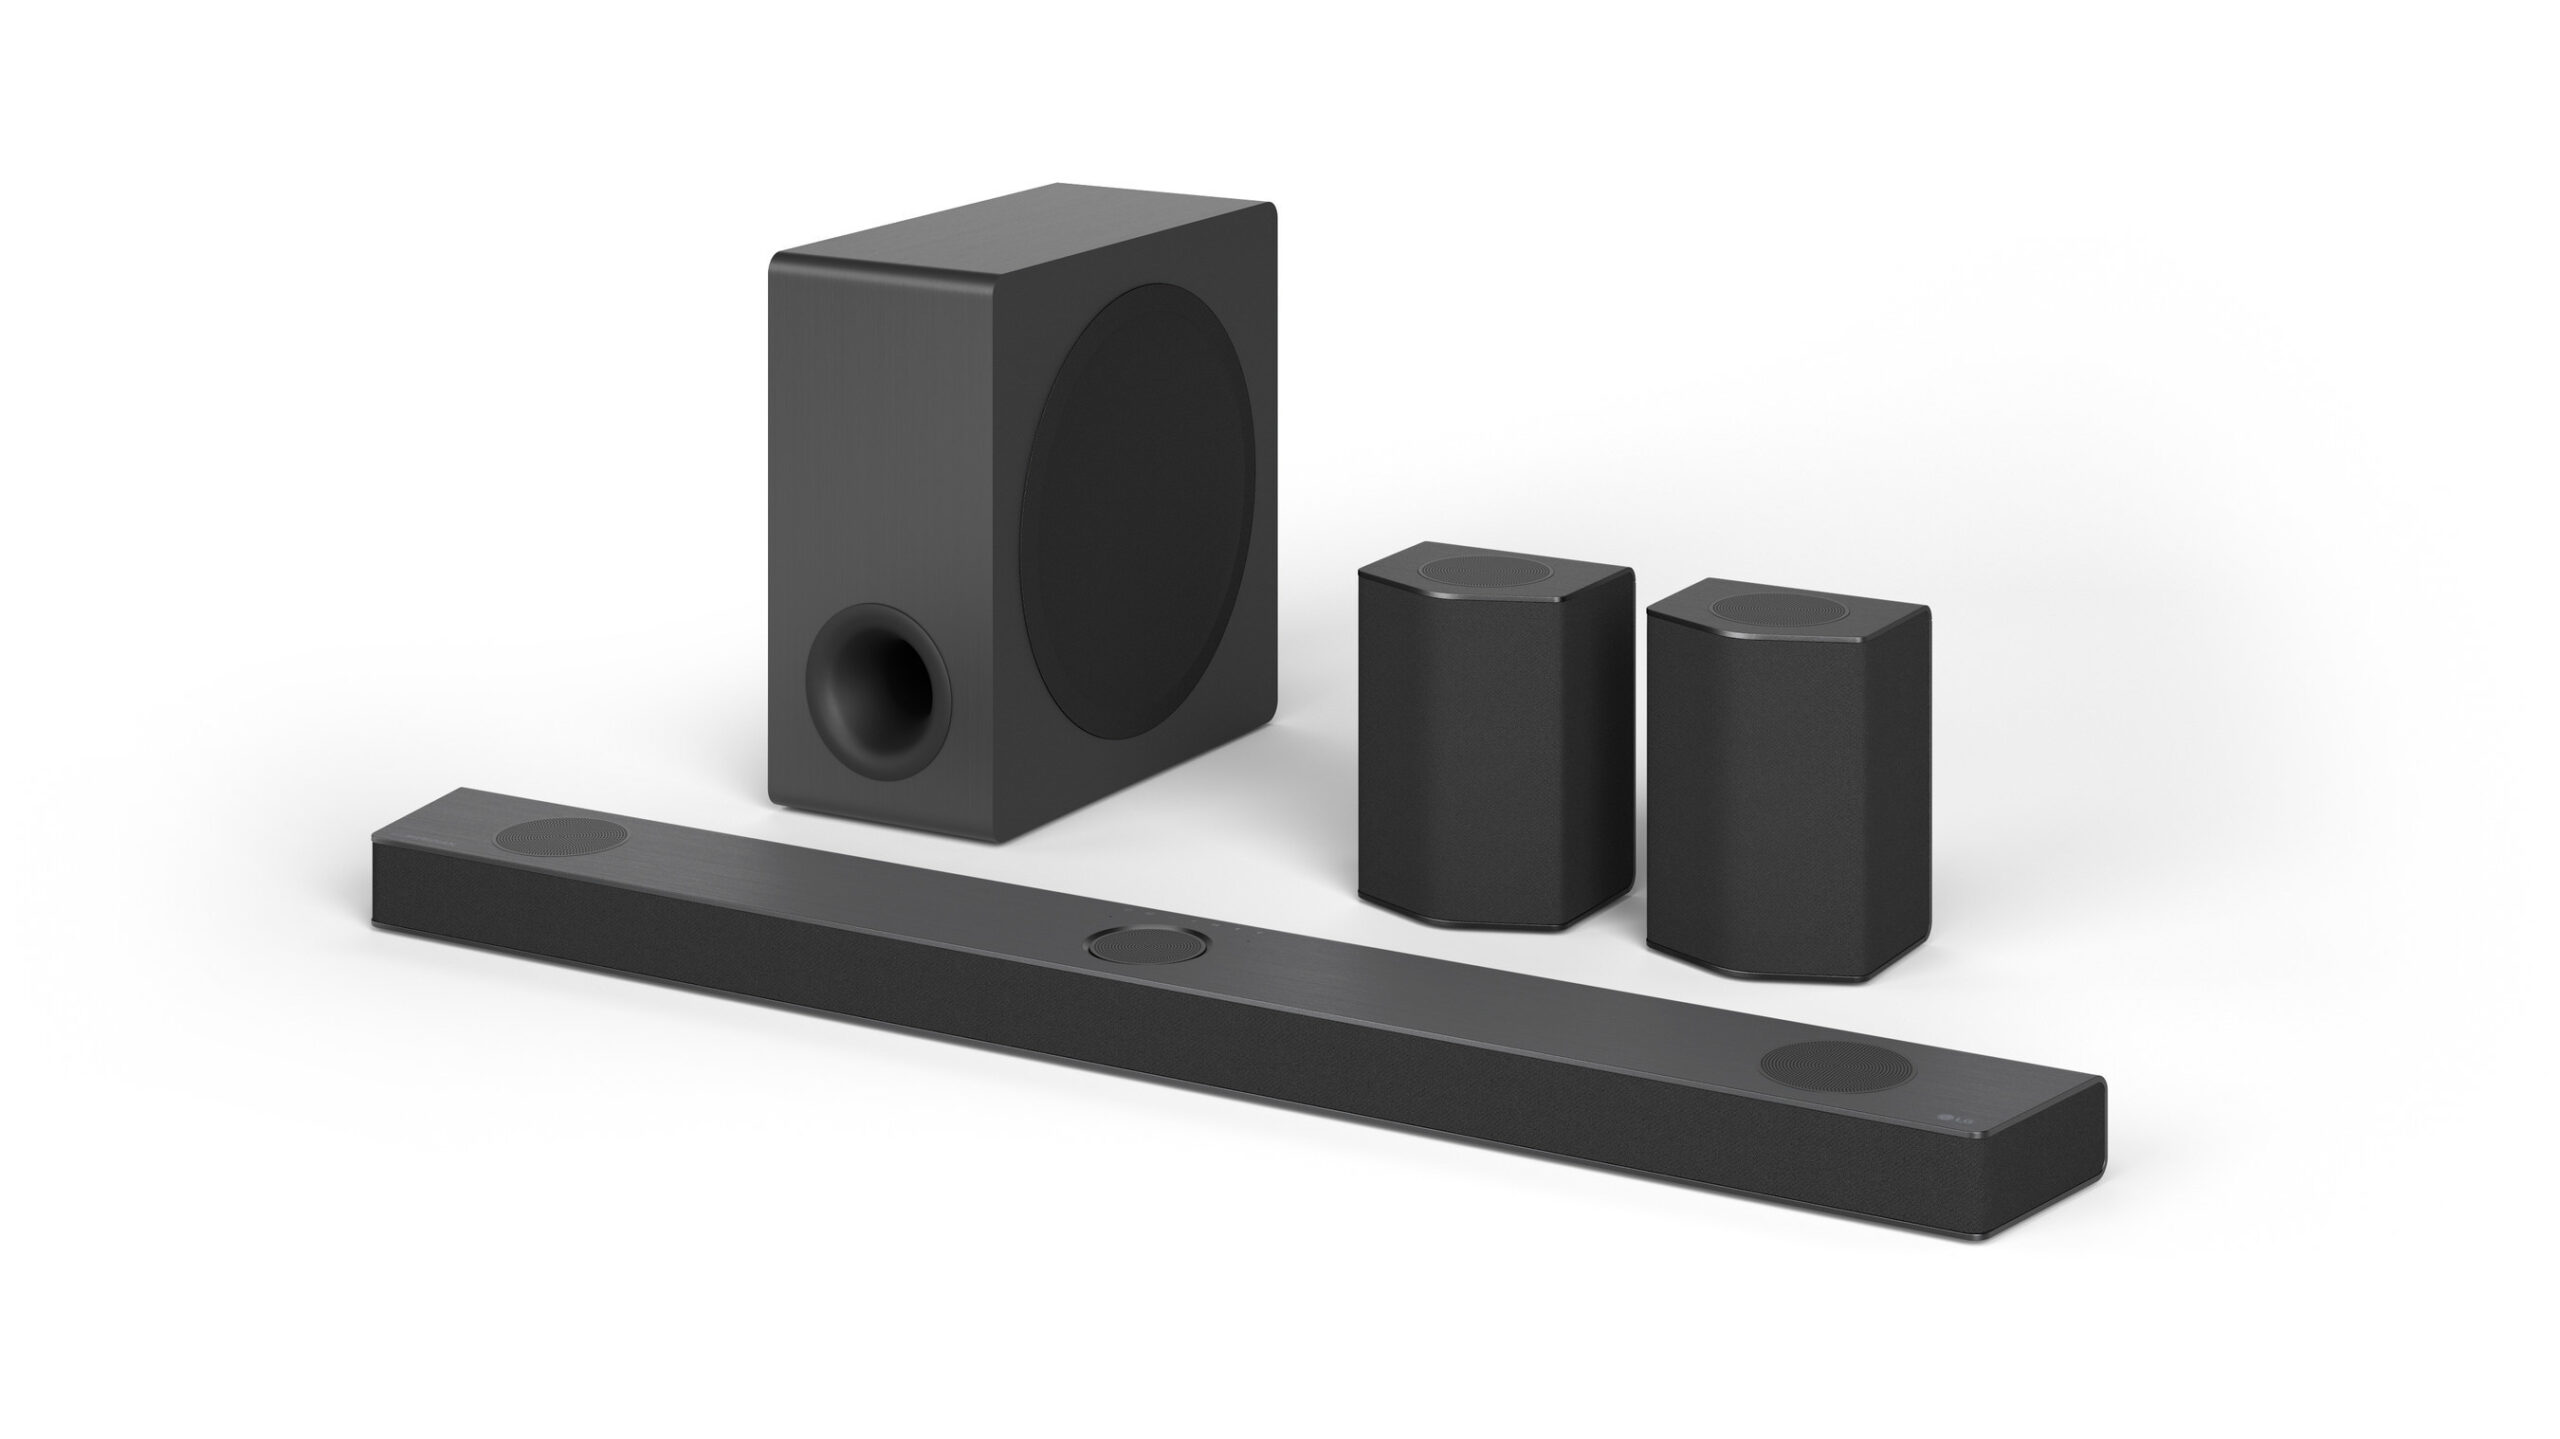 NEW PREMIUM SOUNDBAR FROM LG DELIVERS NEXT LEVEL AUDIO FOR TODAY’S AT-HOME LIFESTYLE